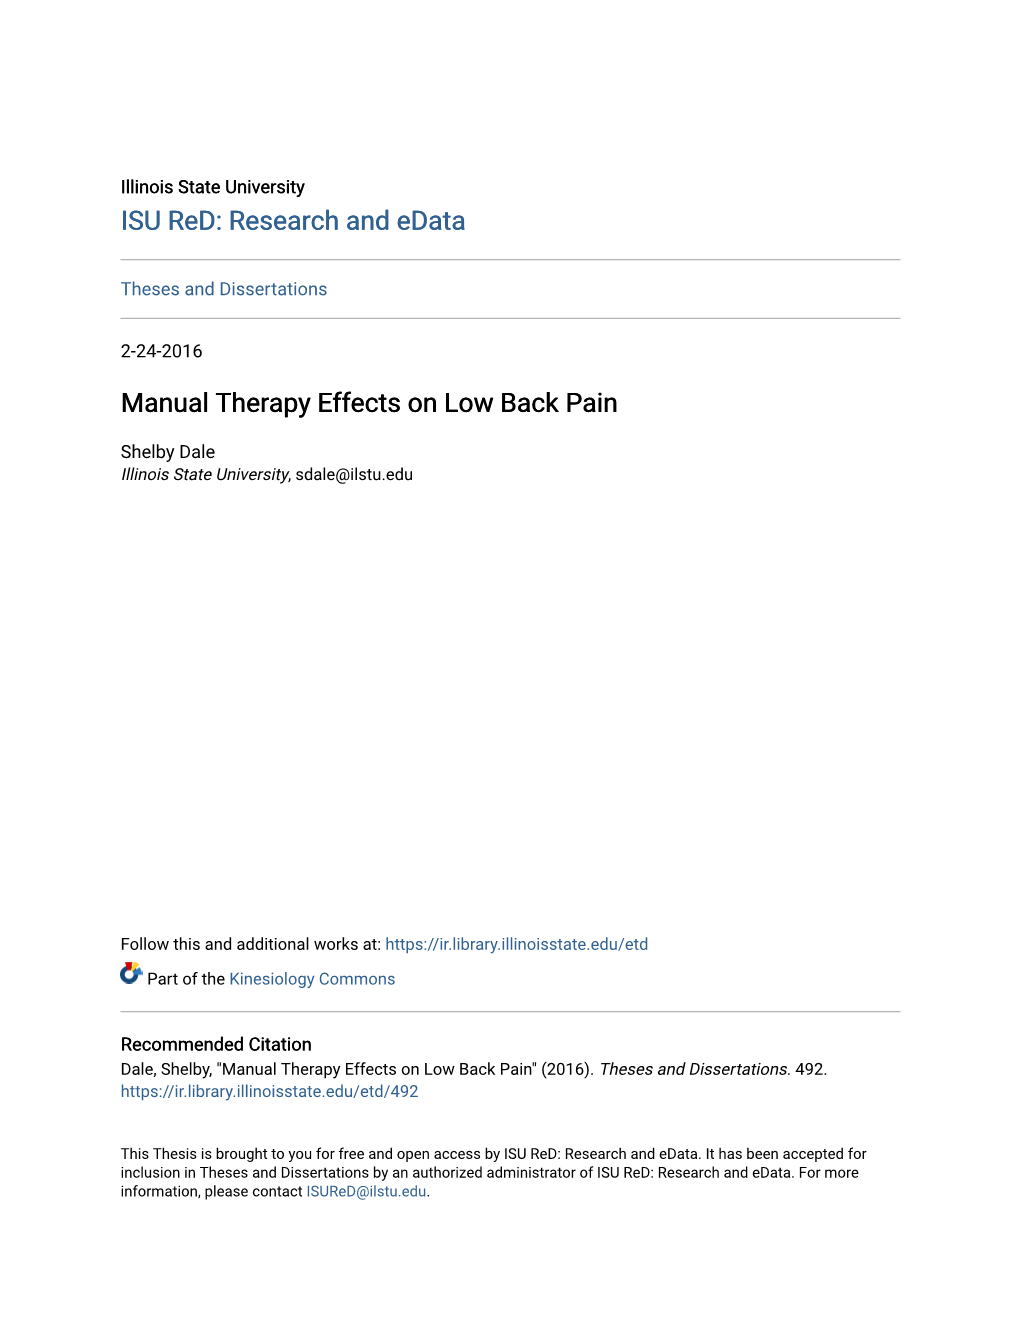 Manual Therapy Effects on Low Back Pain